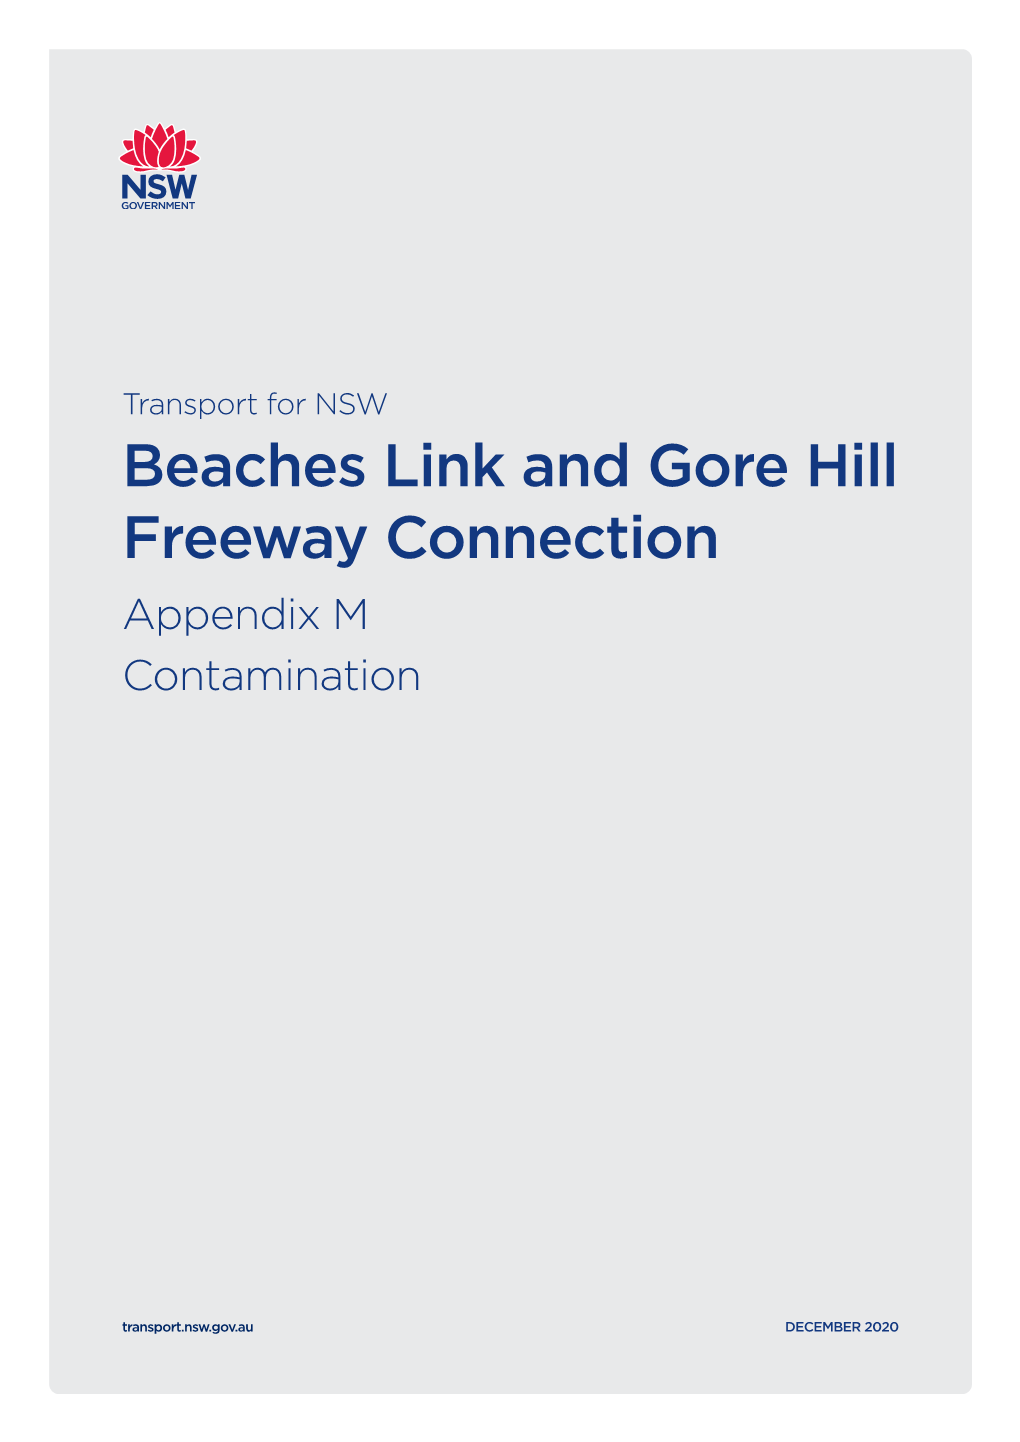 Beaches Link and Gore Hill Freeway Connection Appendix M Contamination